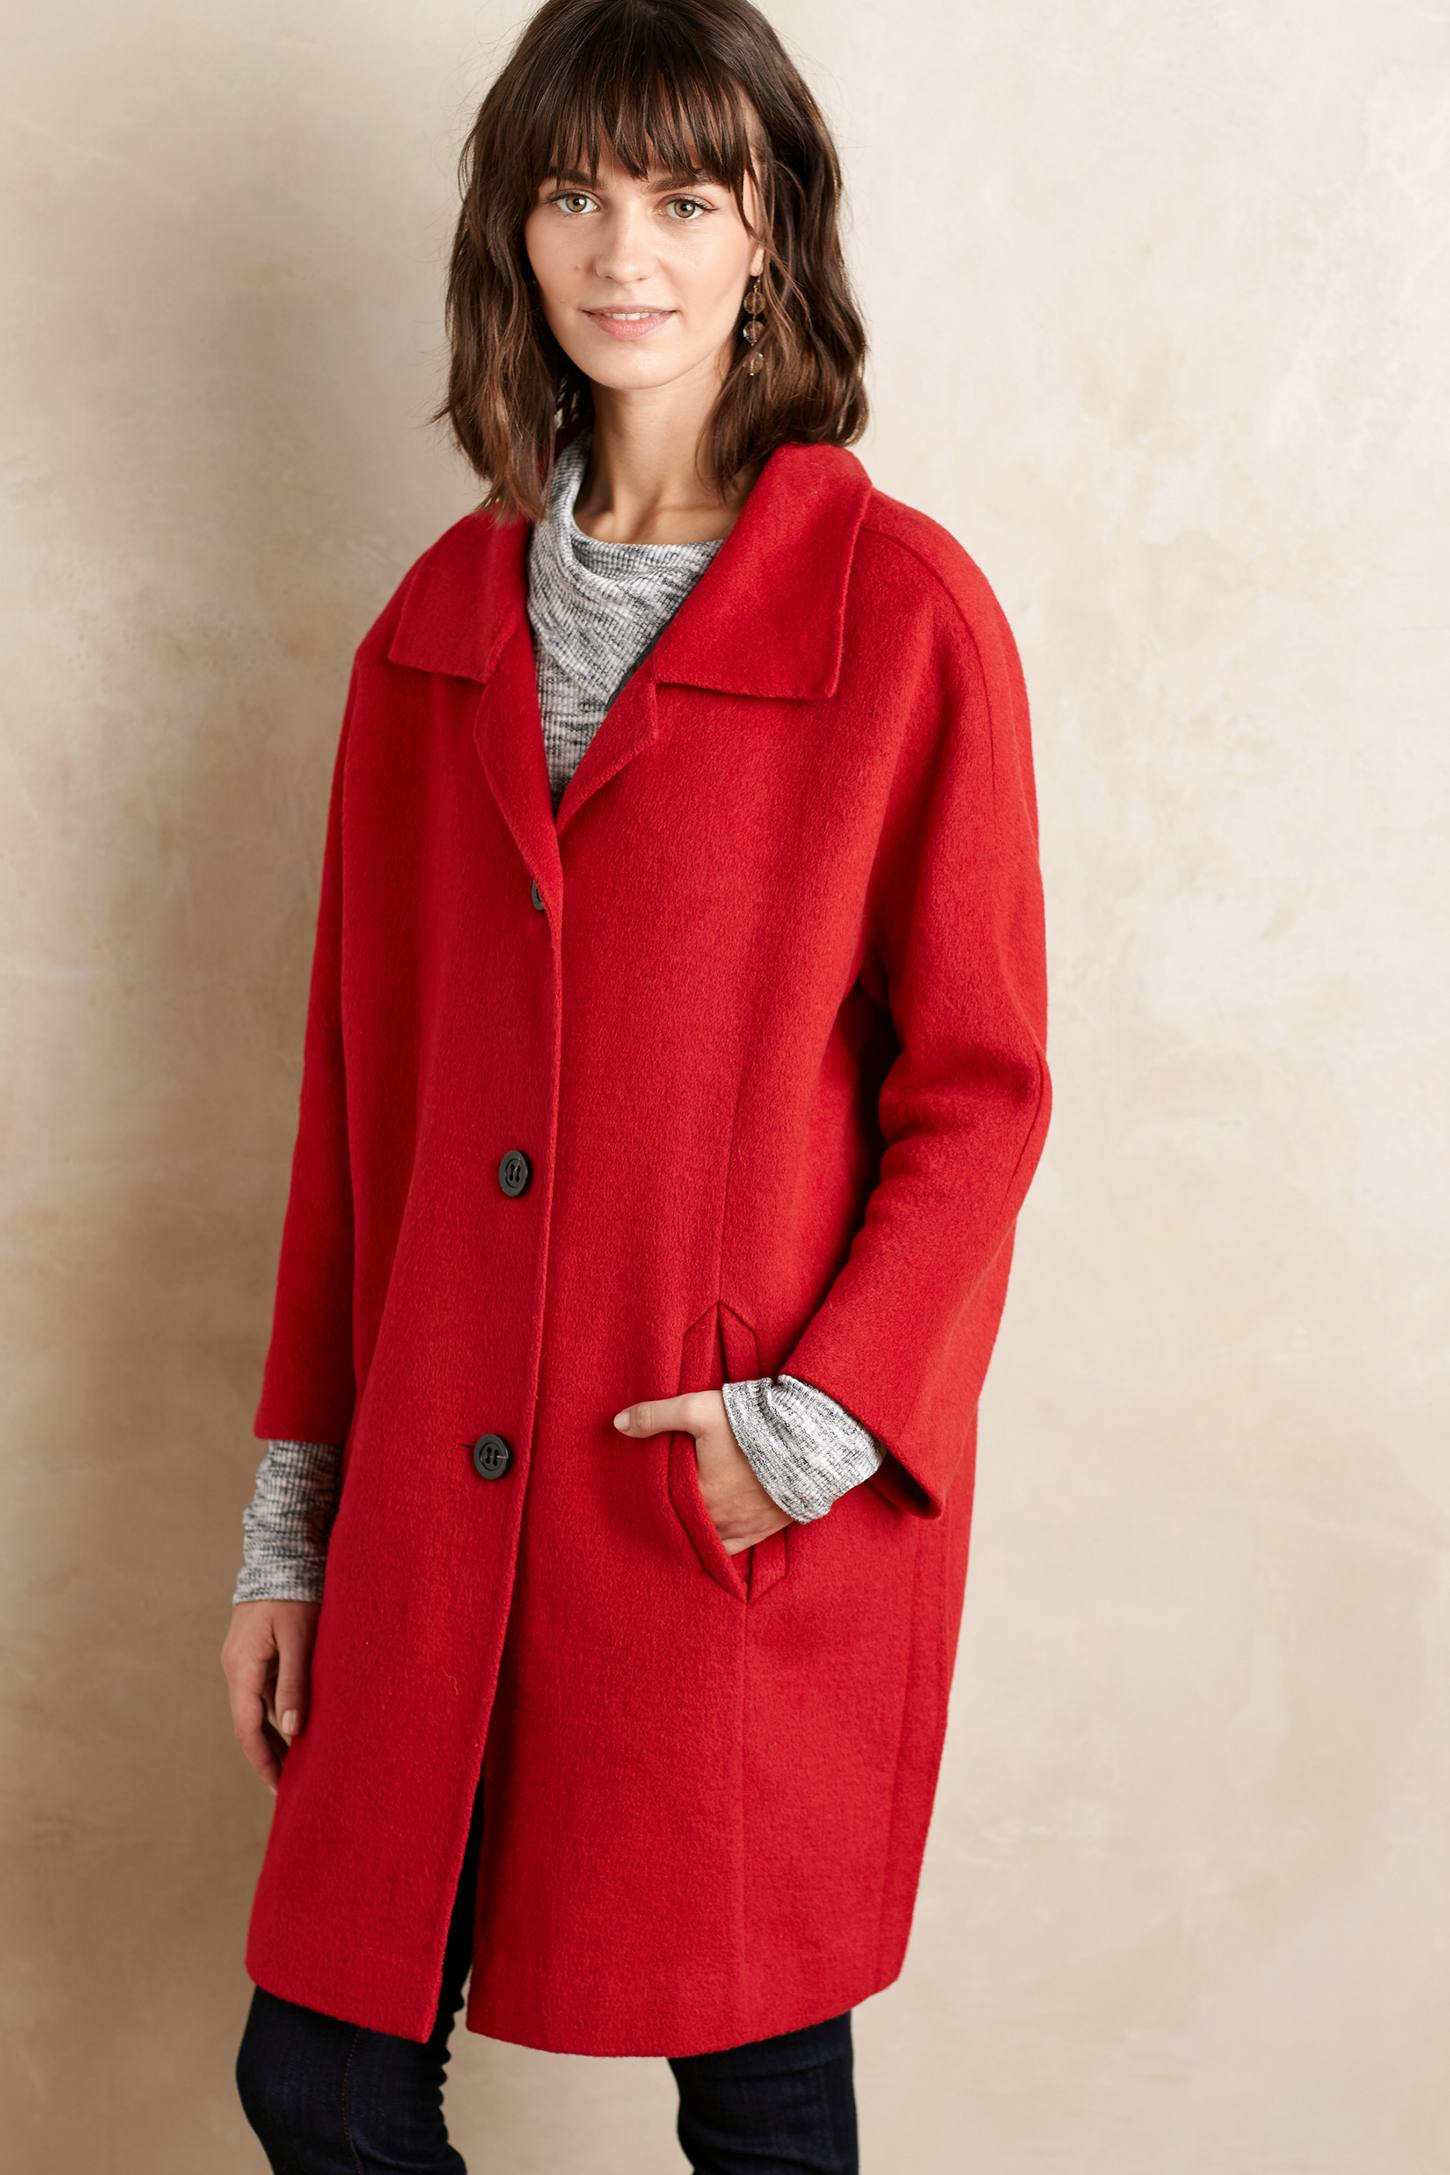 Lyst - Elevenses Brienne Coat in Red